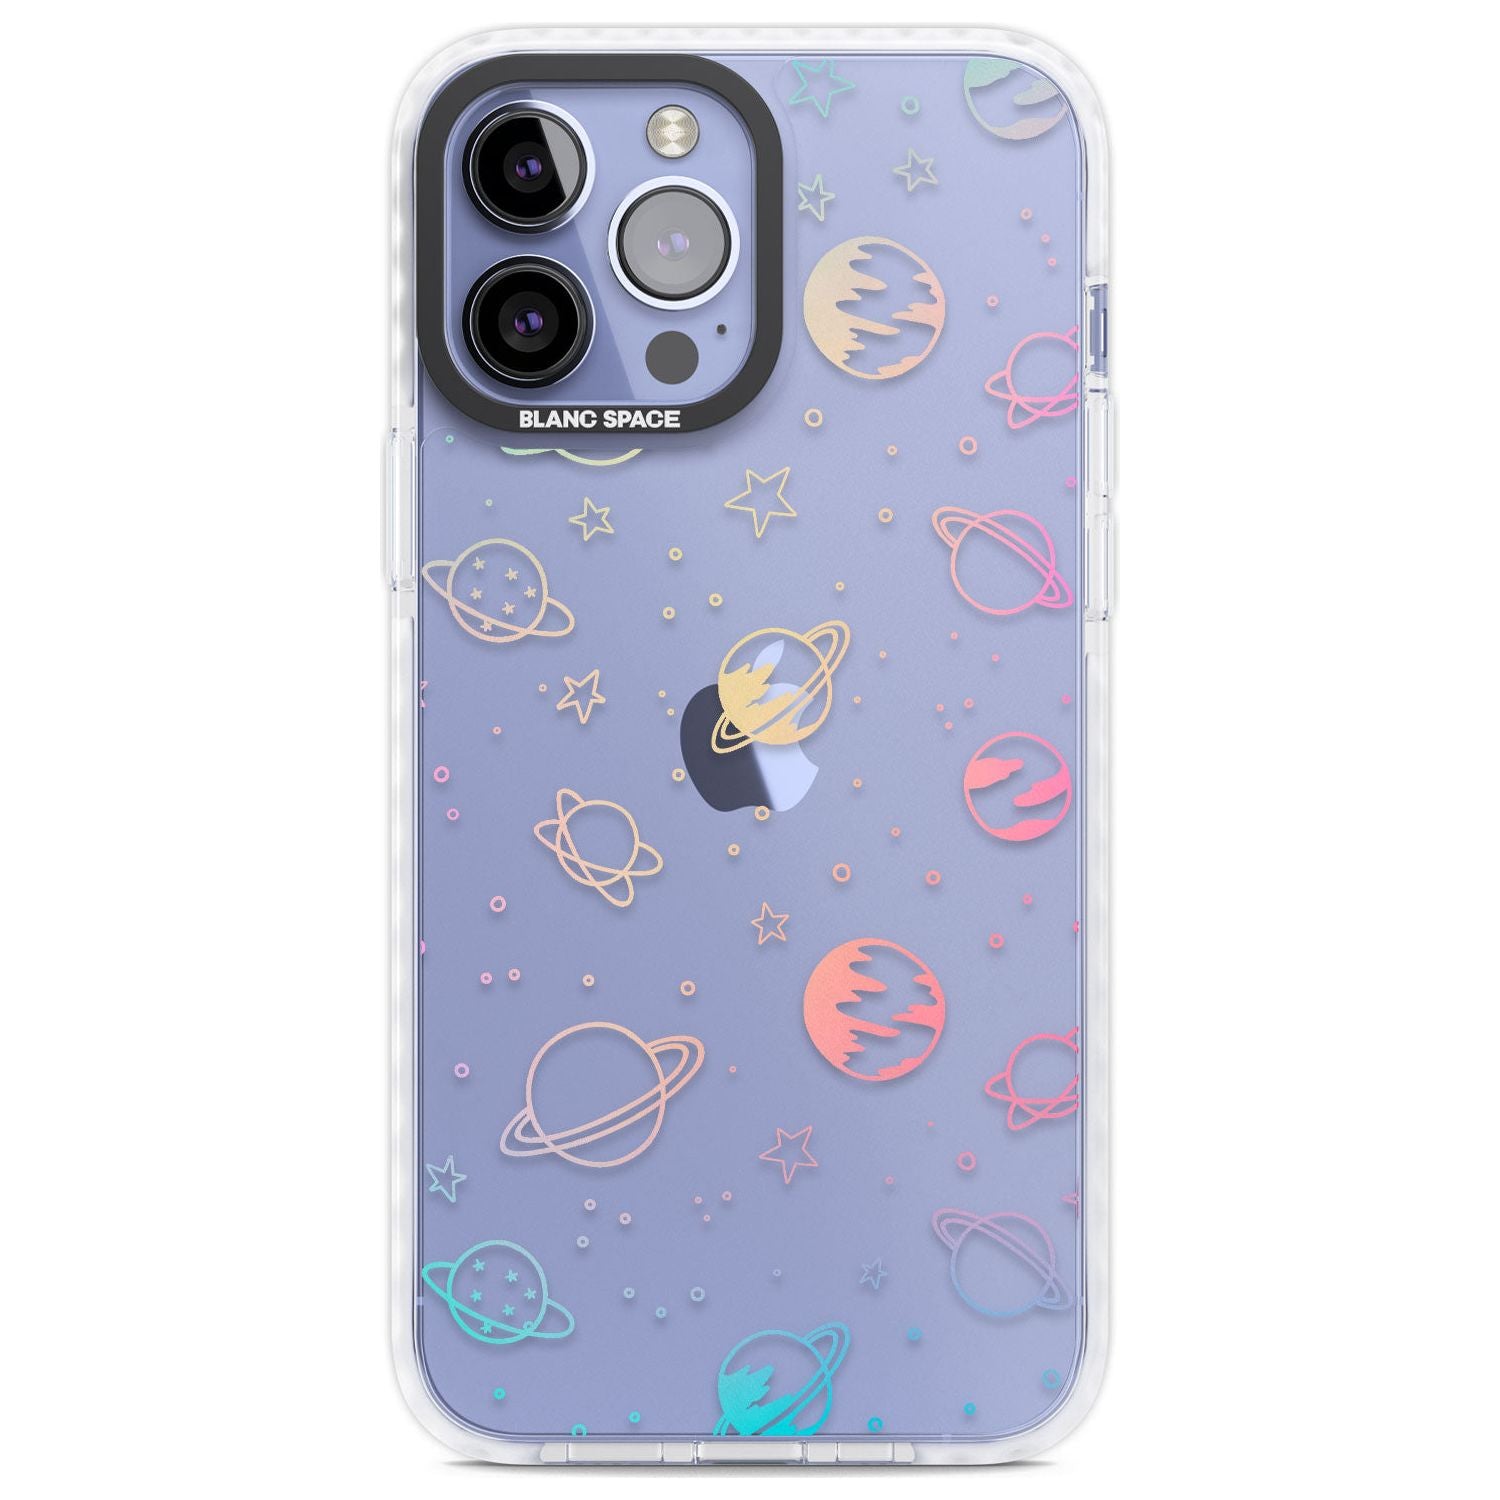 Cosmic Outer Space Design Pastels on Clear Phone Case iPhone 13 Pro Max / Impact Case,iPhone 14 Pro Max / Impact Case Blanc Space